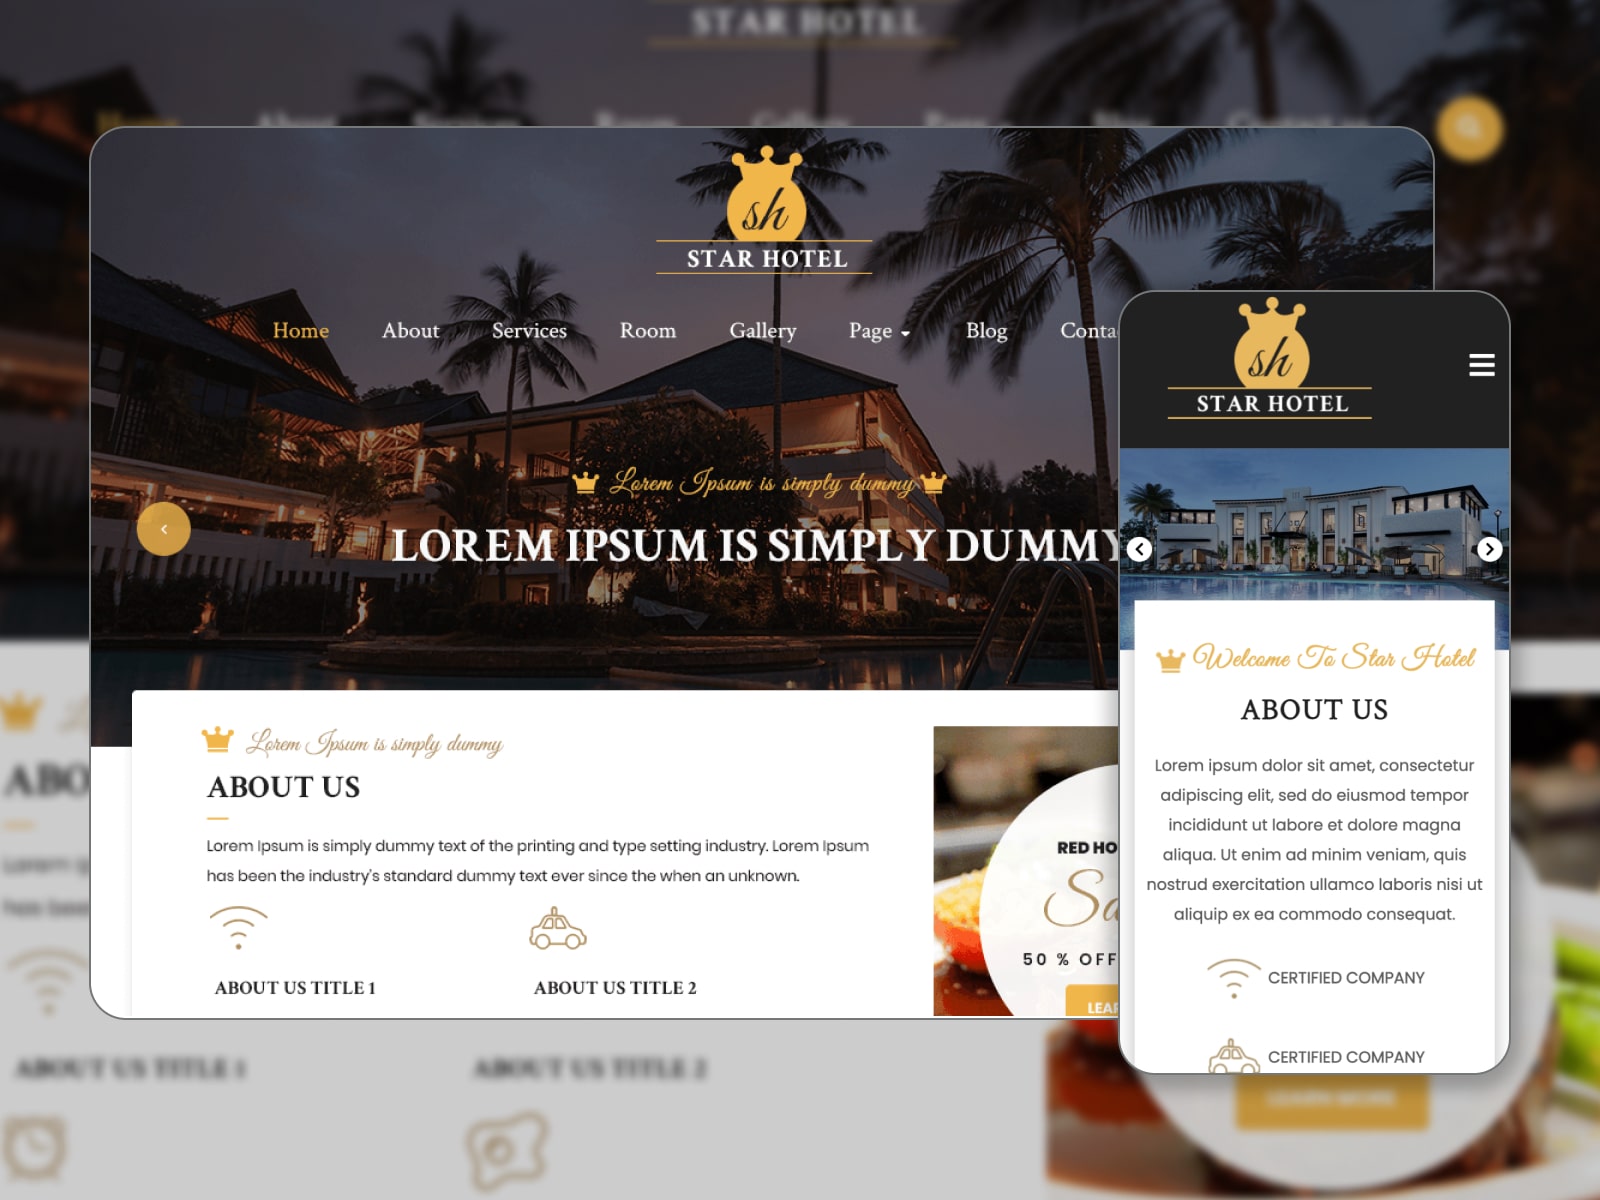 Collage of the free VW Hotel apartment booking themes for WordPress sites in brown, white and yellow colors.